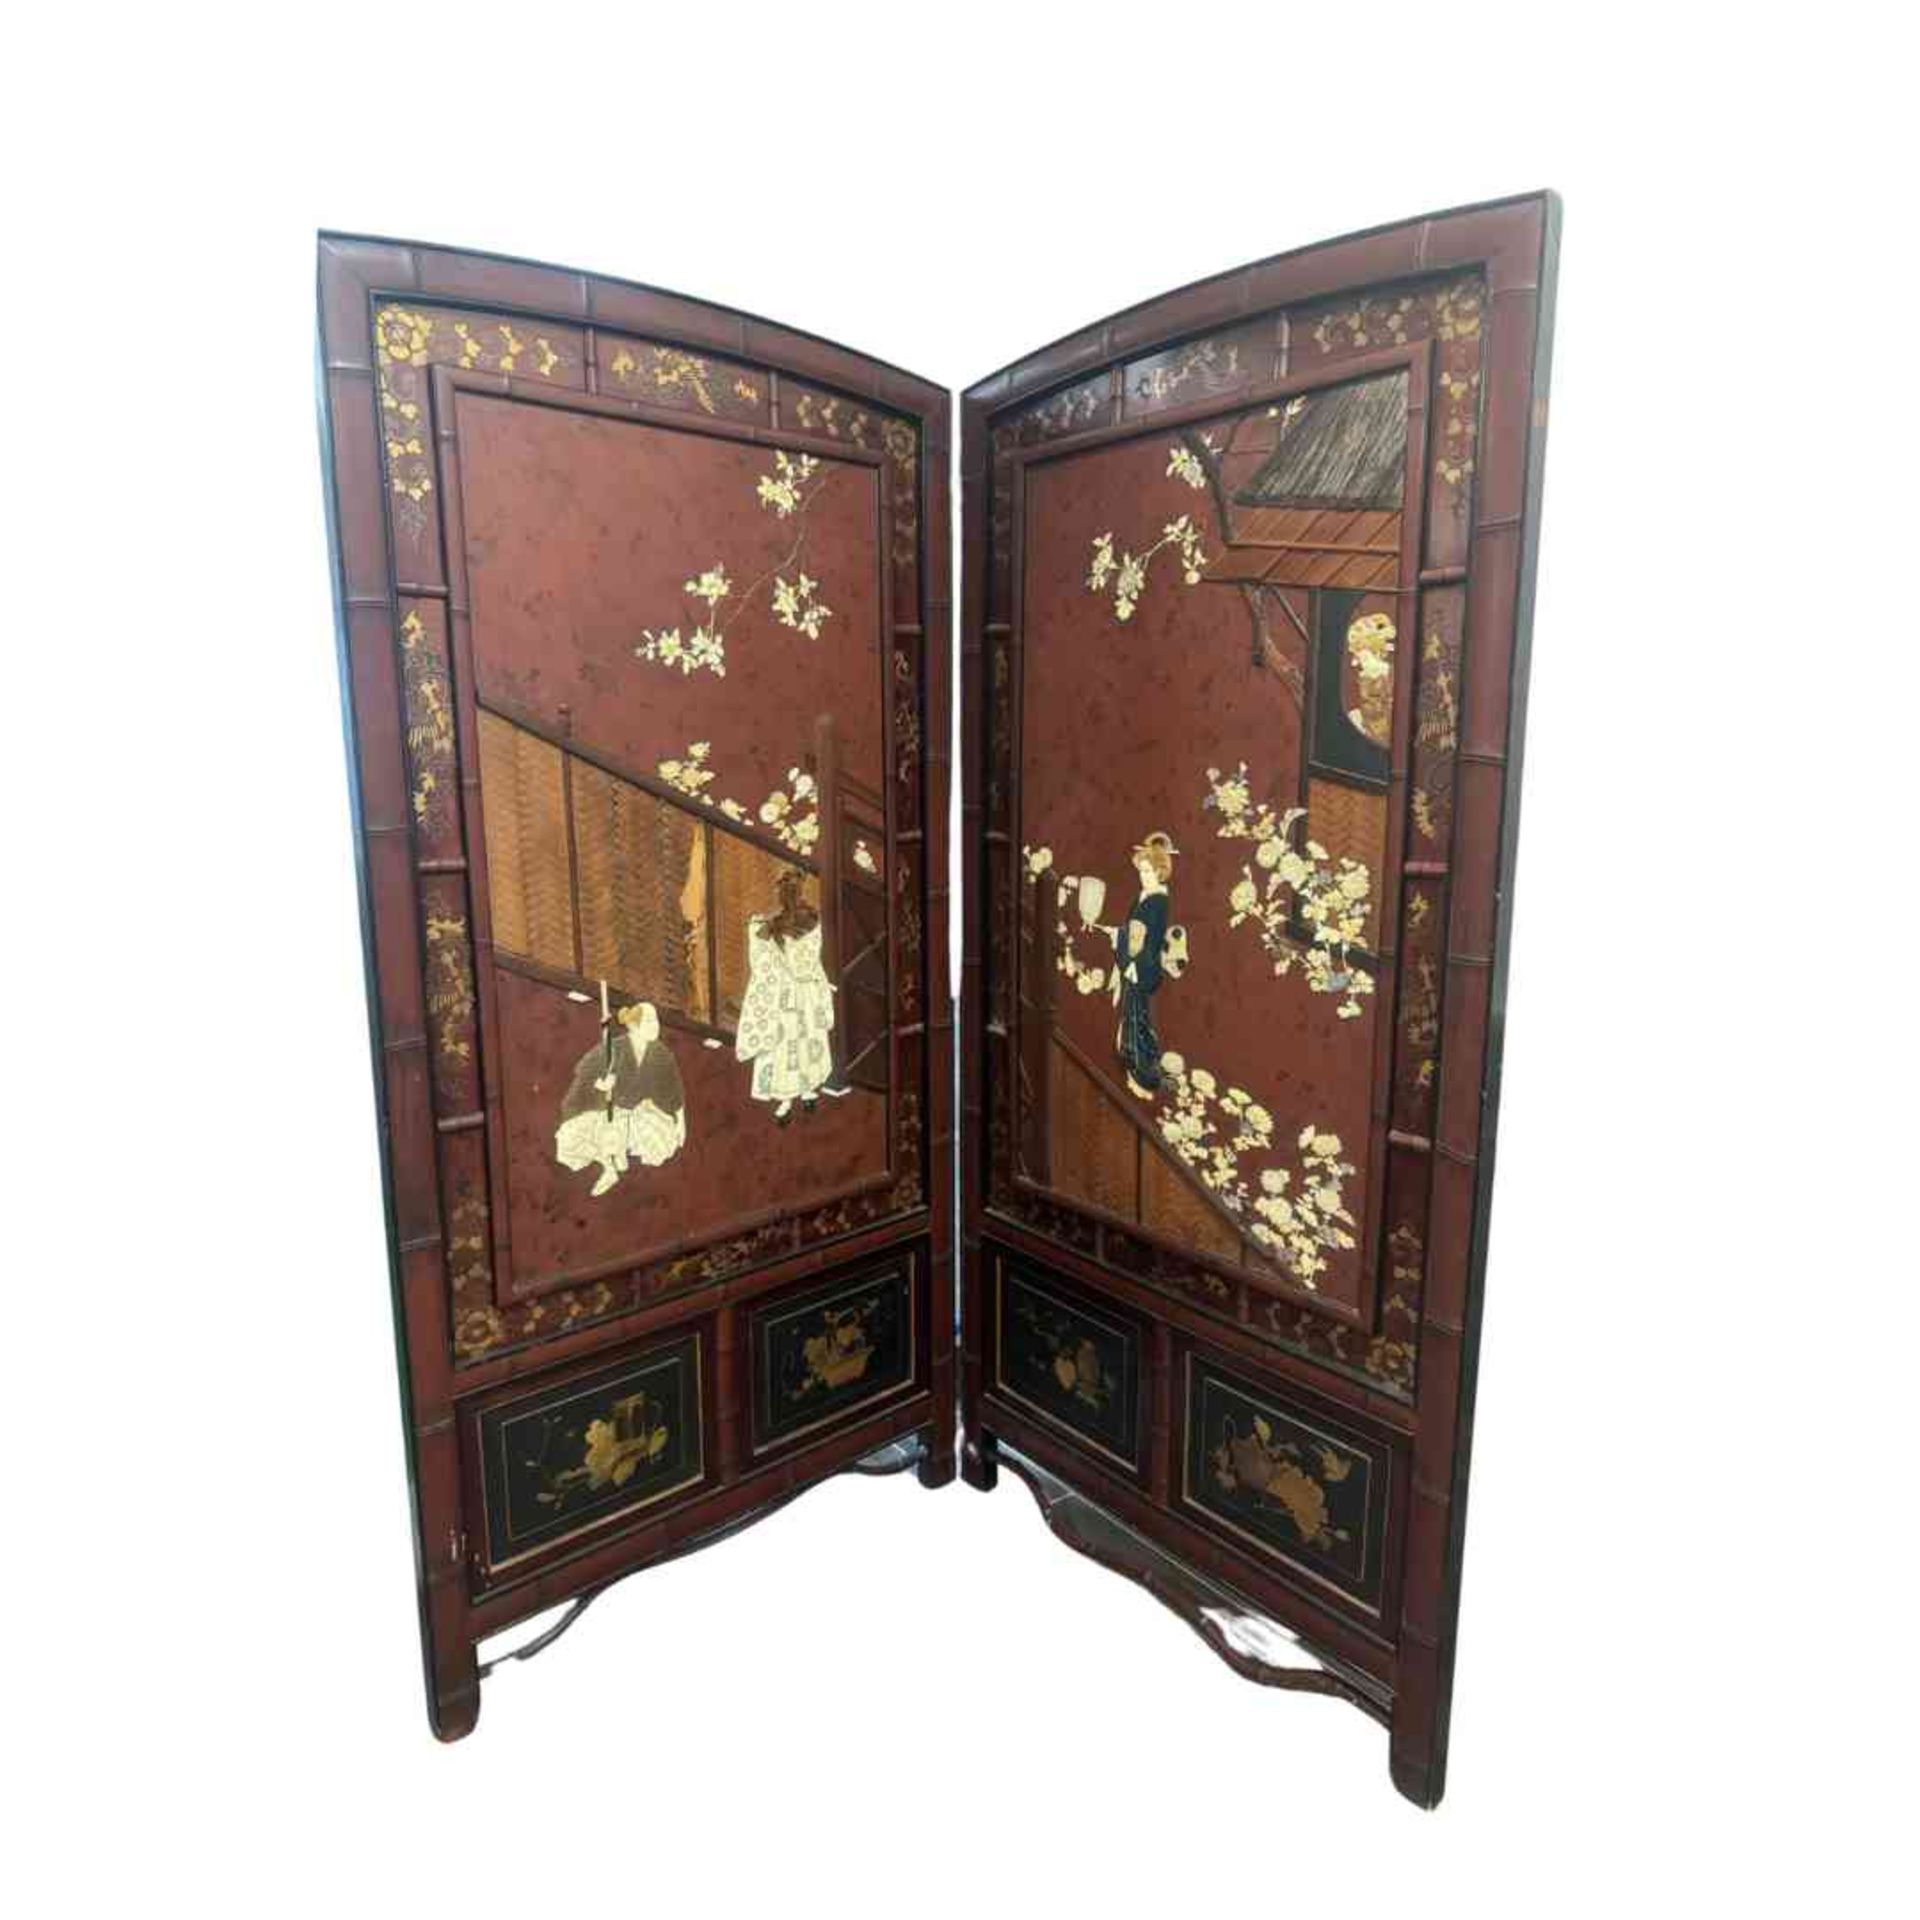 Double-wing lacquered wooden screen - Image 3 of 23